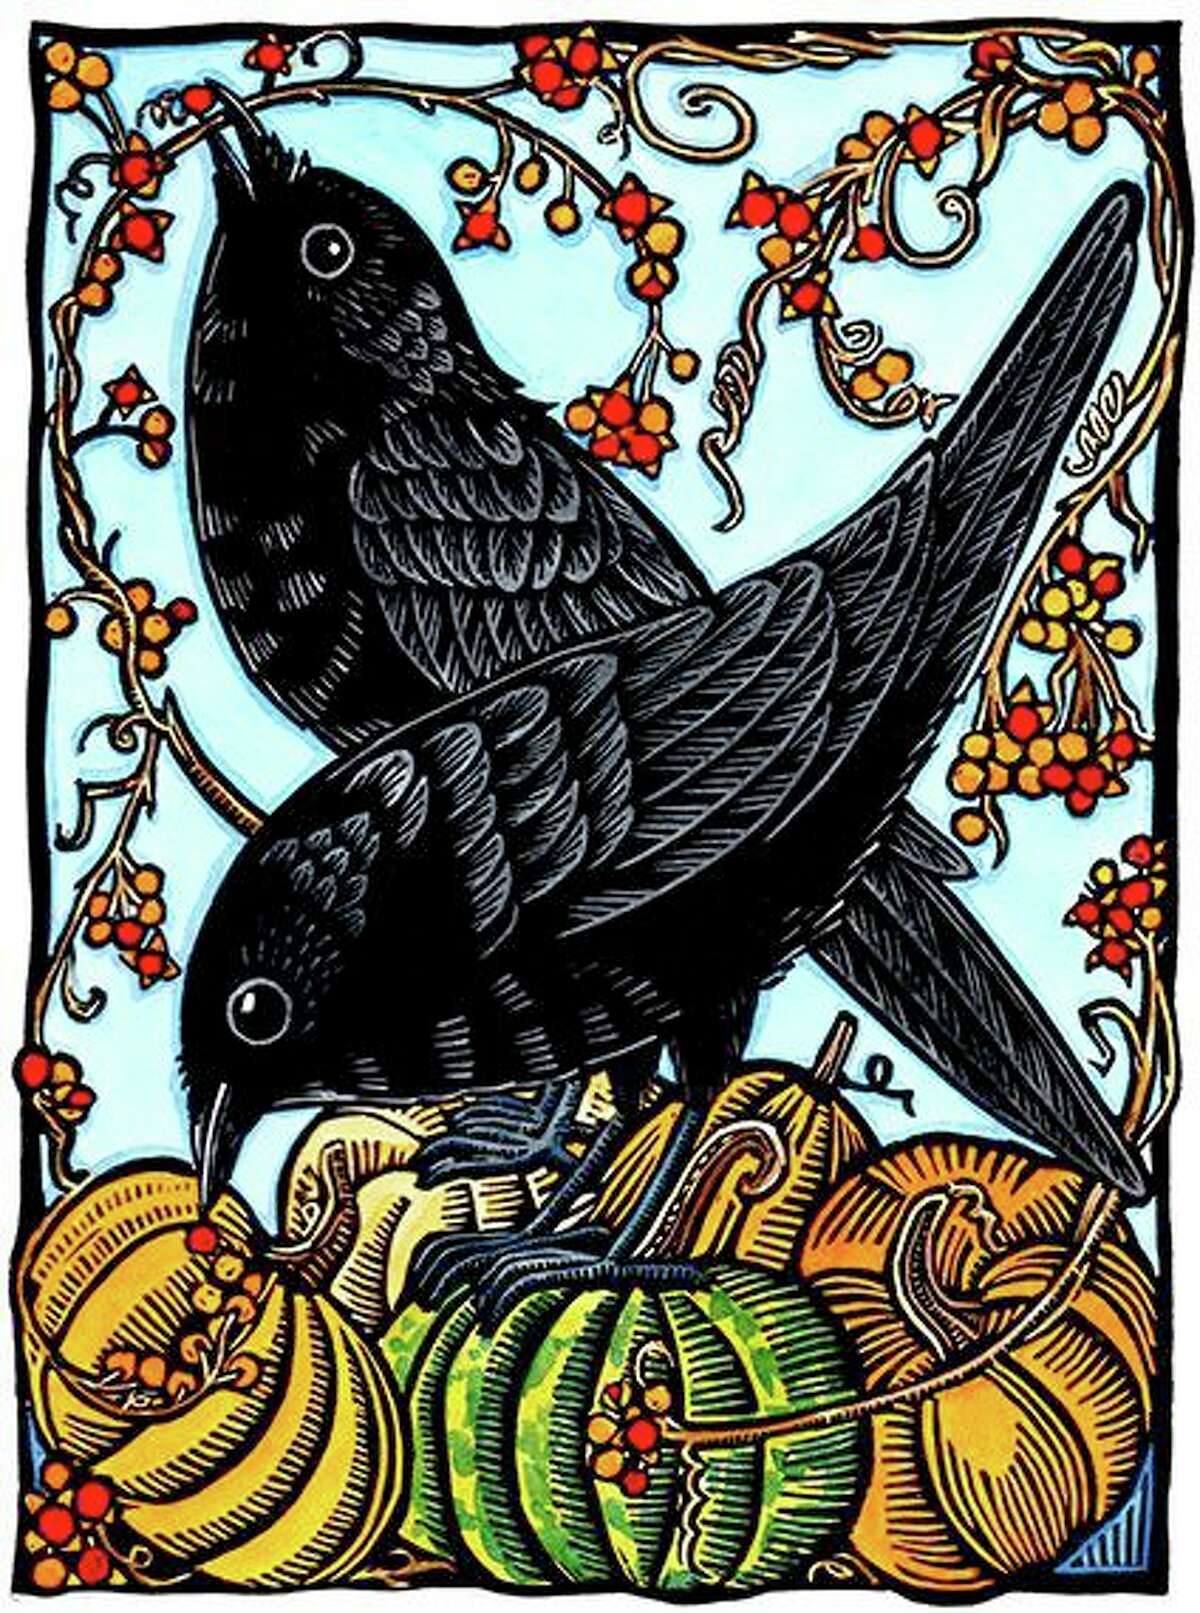 “Crows & Bittersweet,” by Andrea Wisnewski (hand-colored print).